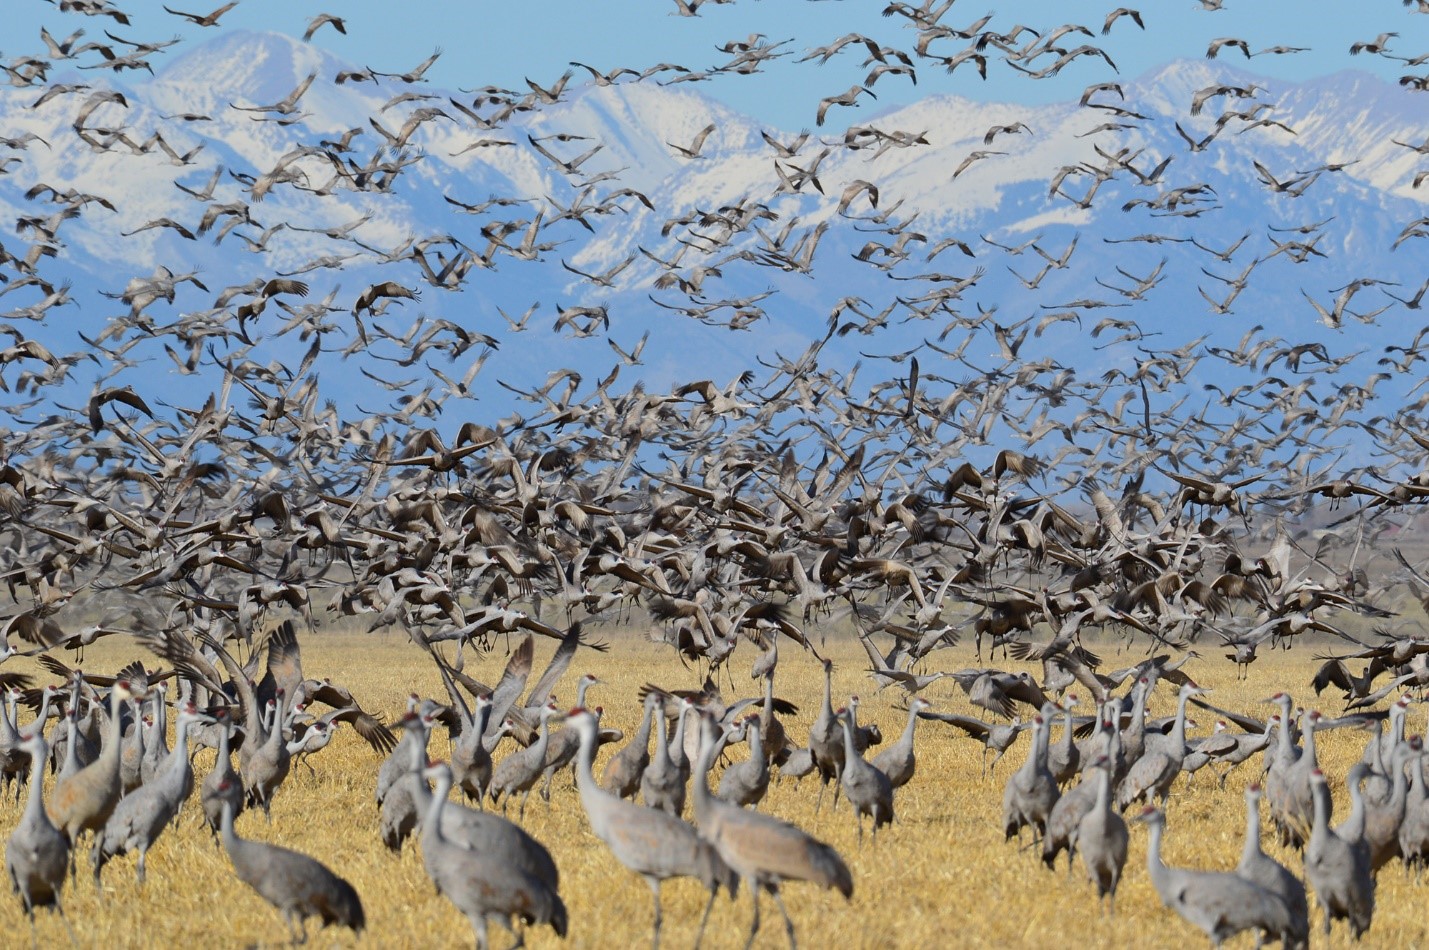 Large gray birds flying in the sky and walking on dry grass with snowcapped mountains and a blue sky in the background.